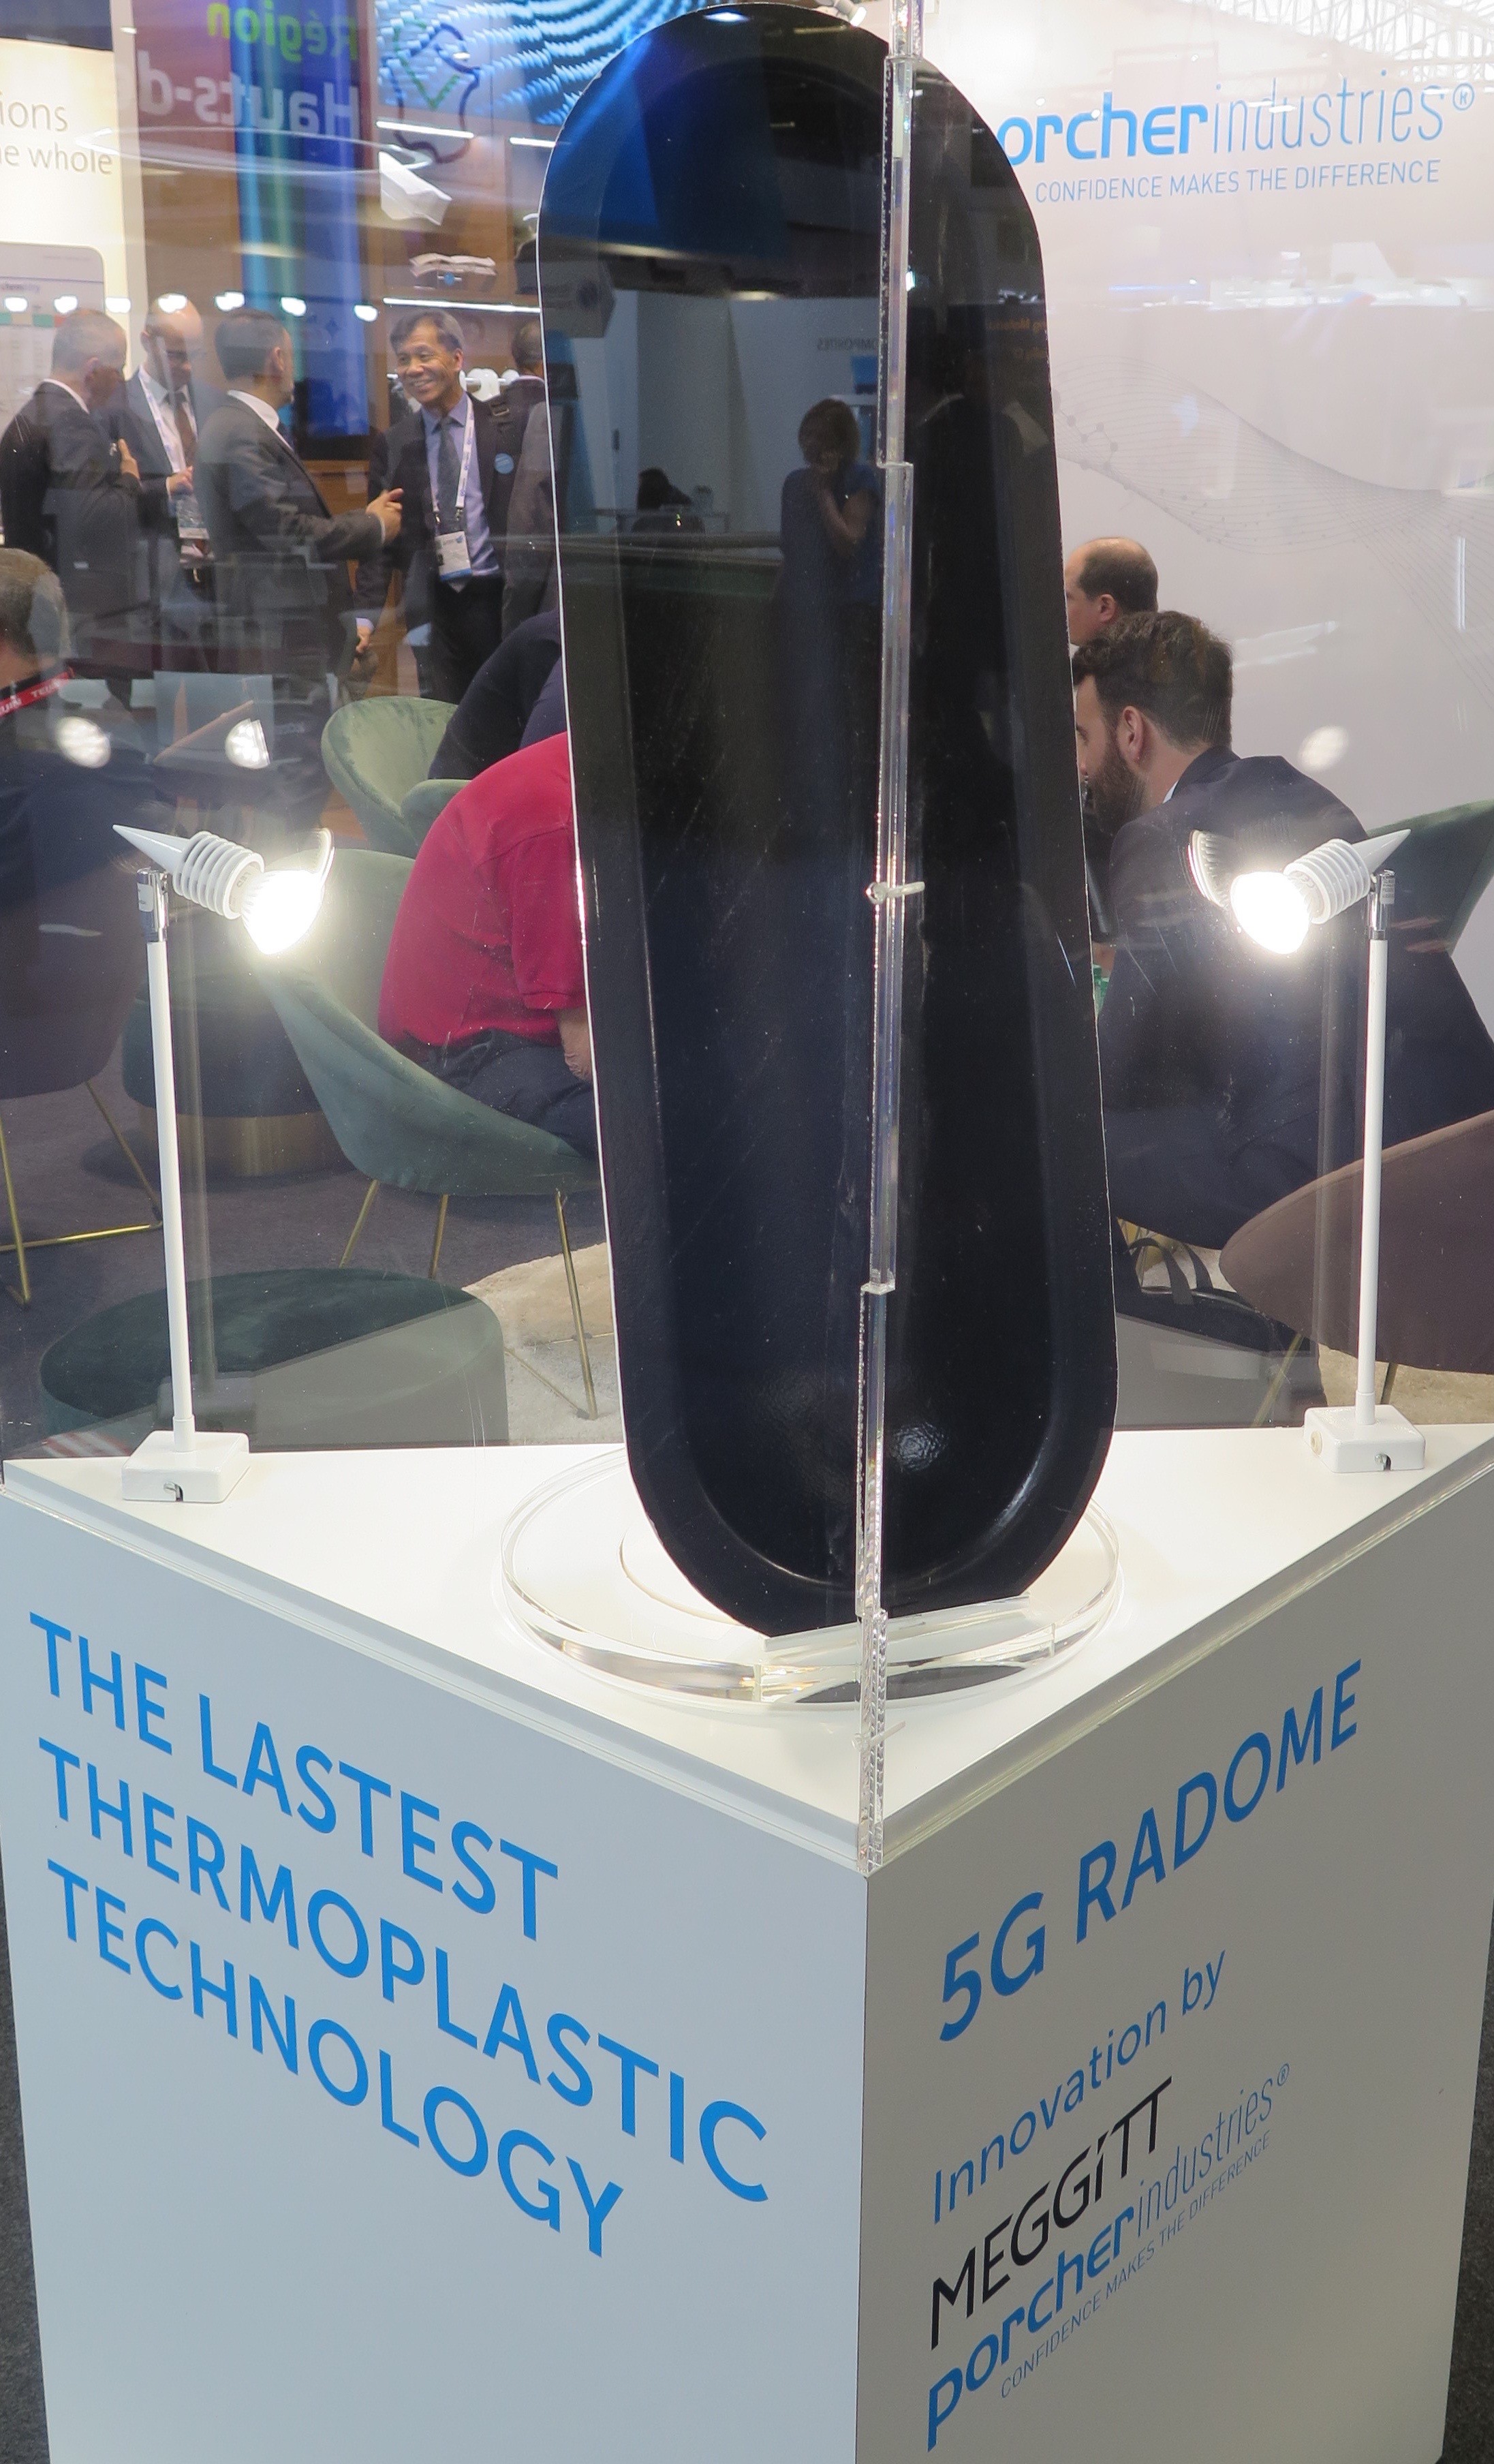 On display will be thermoplastic 5G radome technology.